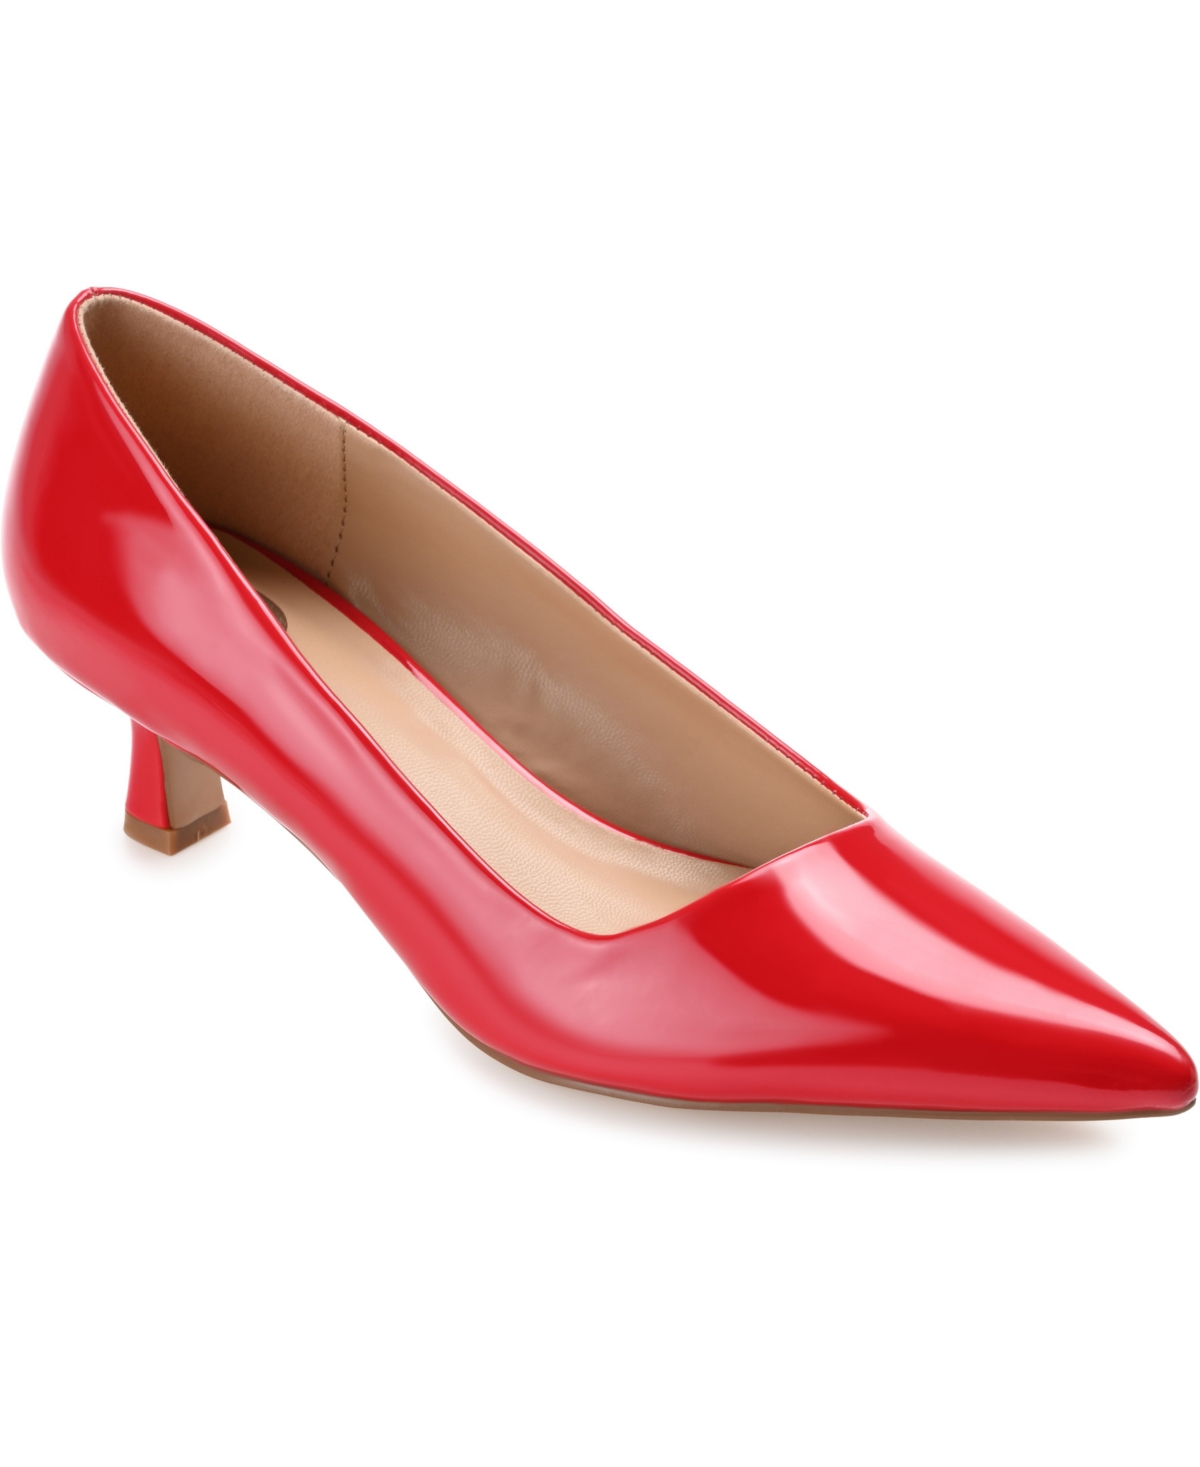 Vintage Shoes in Pictures | Shop Vintage Style Shoes Journee Collection Womens Celica Heels - Patent Red $71.24 AT vintagedancer.com